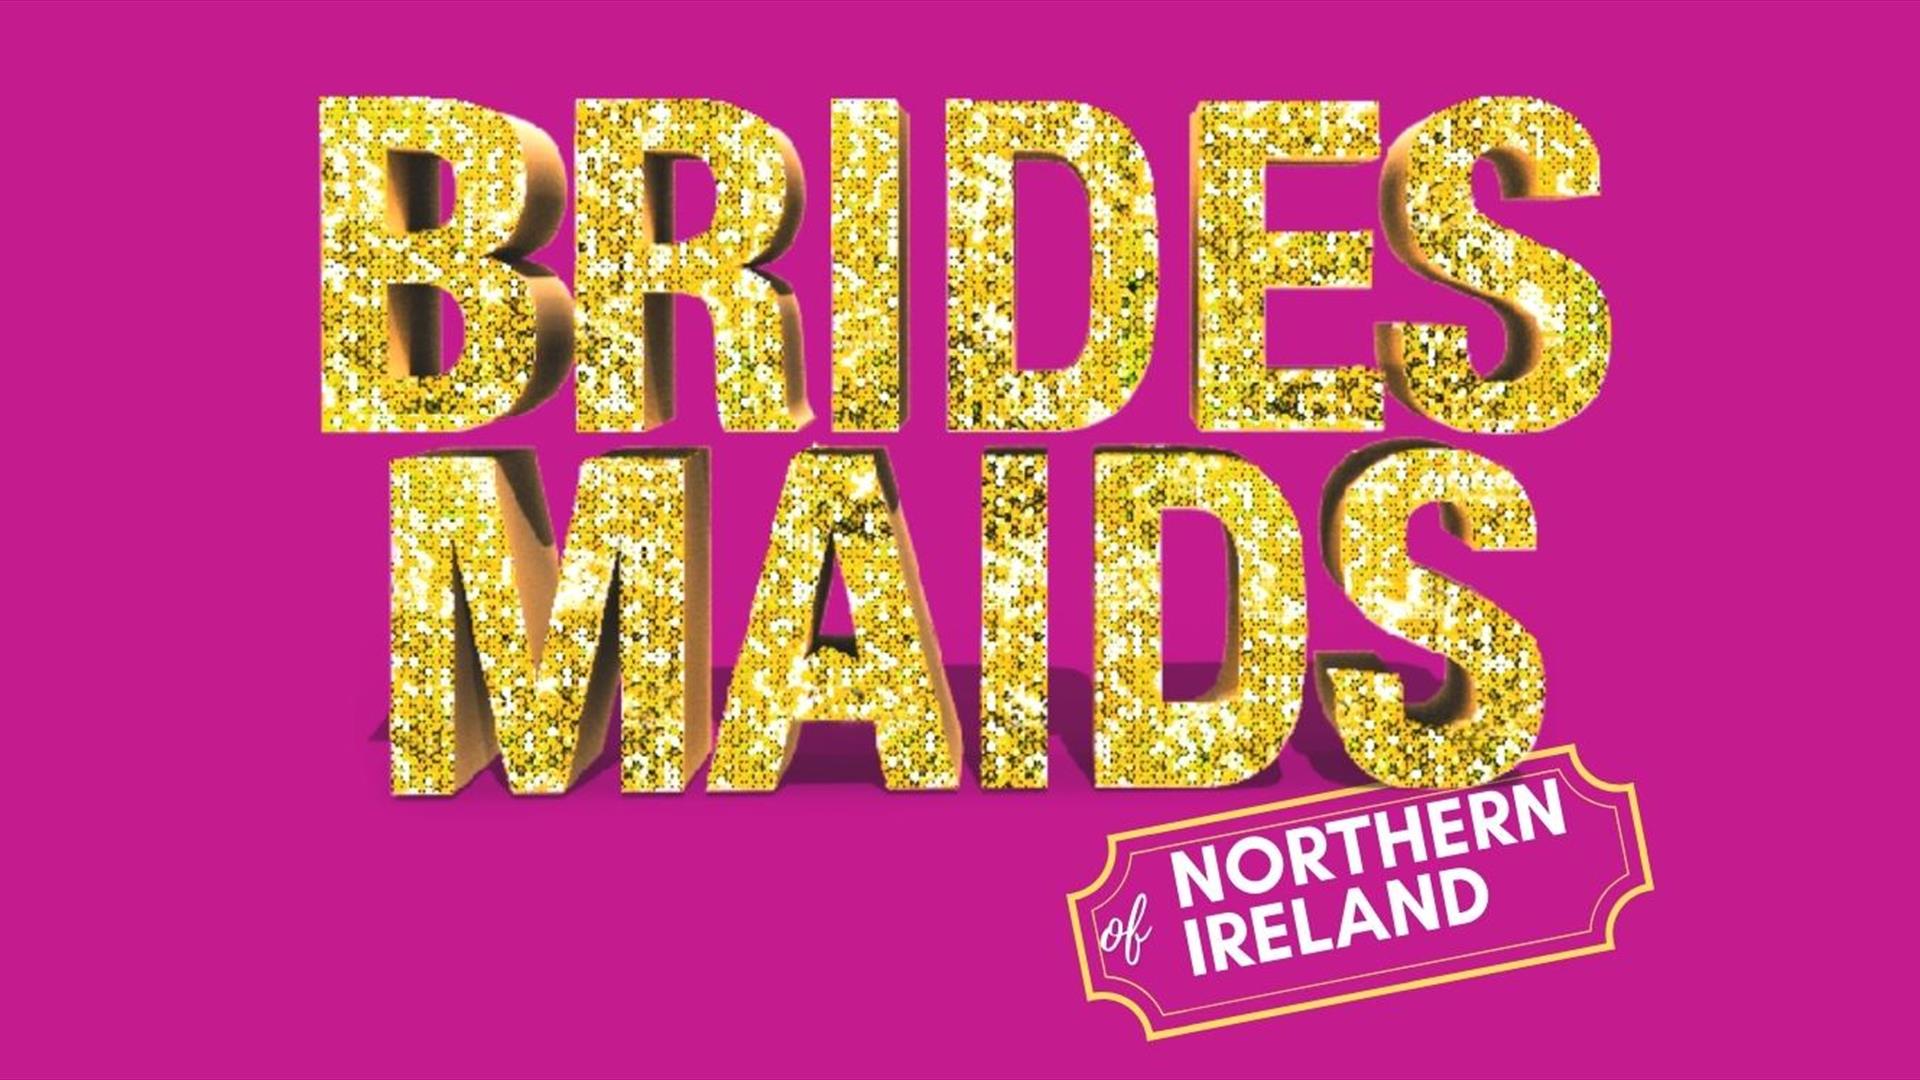 Gold sparkling letters reading 'BRIDESMAIDS' with the words 'of Northern Ireland' in white lettering beneath on a hot pink background